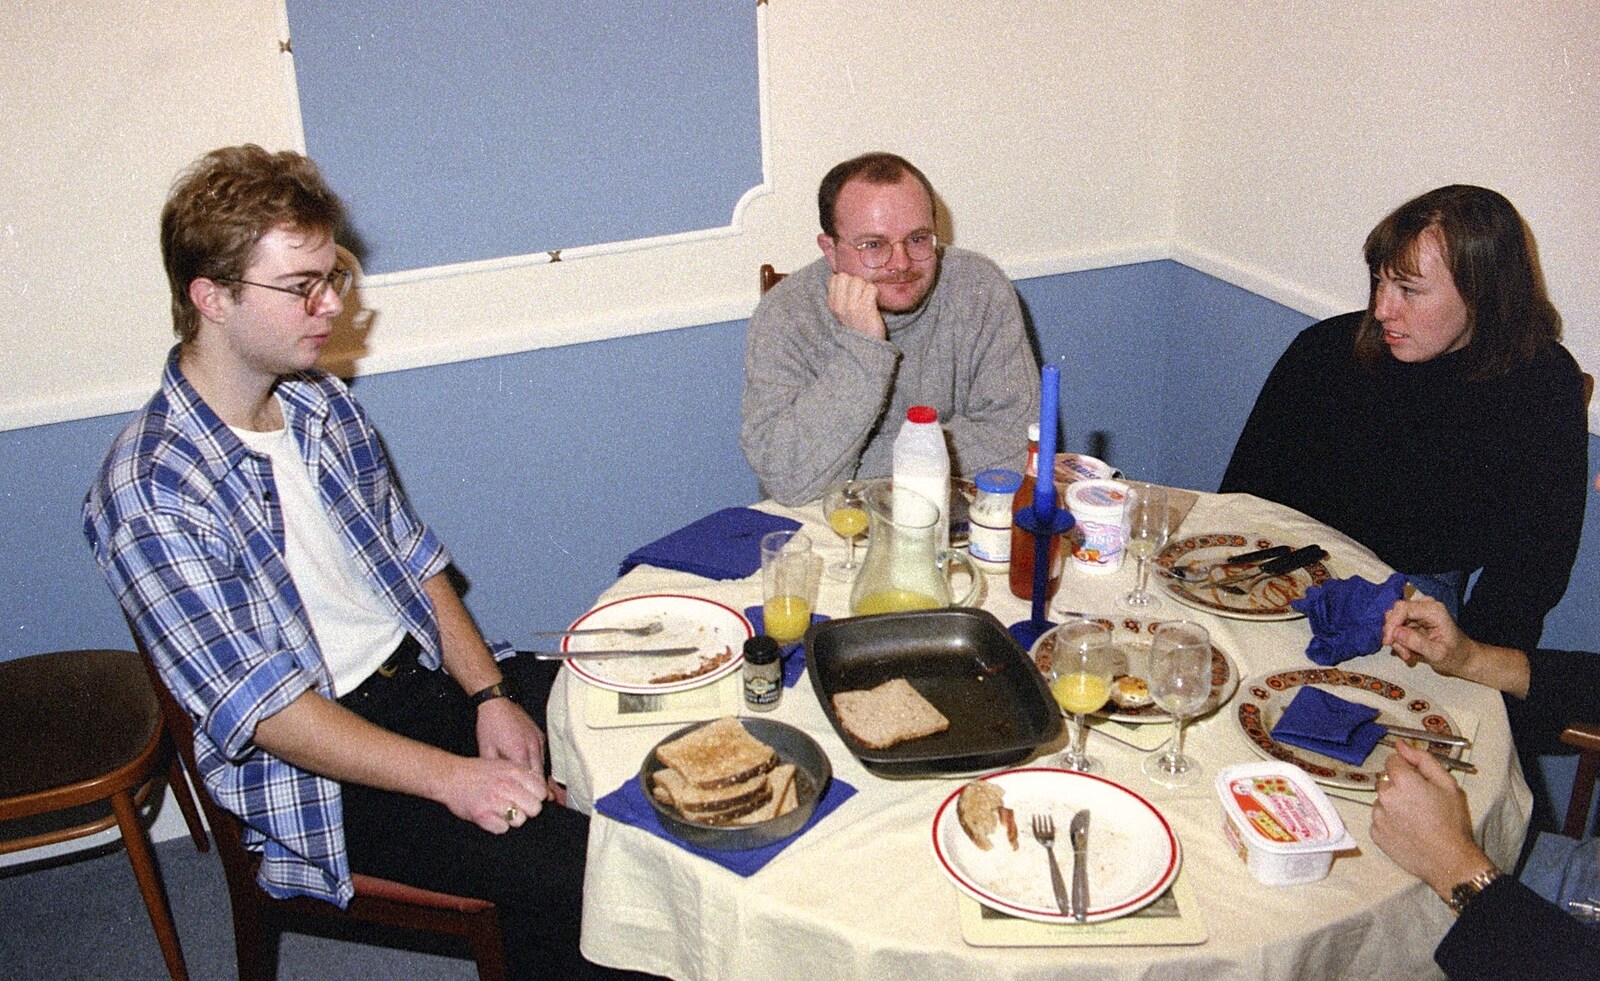 Breakfast of toast in Hamish's mini dining room from Hamish's Thirtieth Birthday, Hare and Hounds, Sway, Hampshire - 19th December 1996